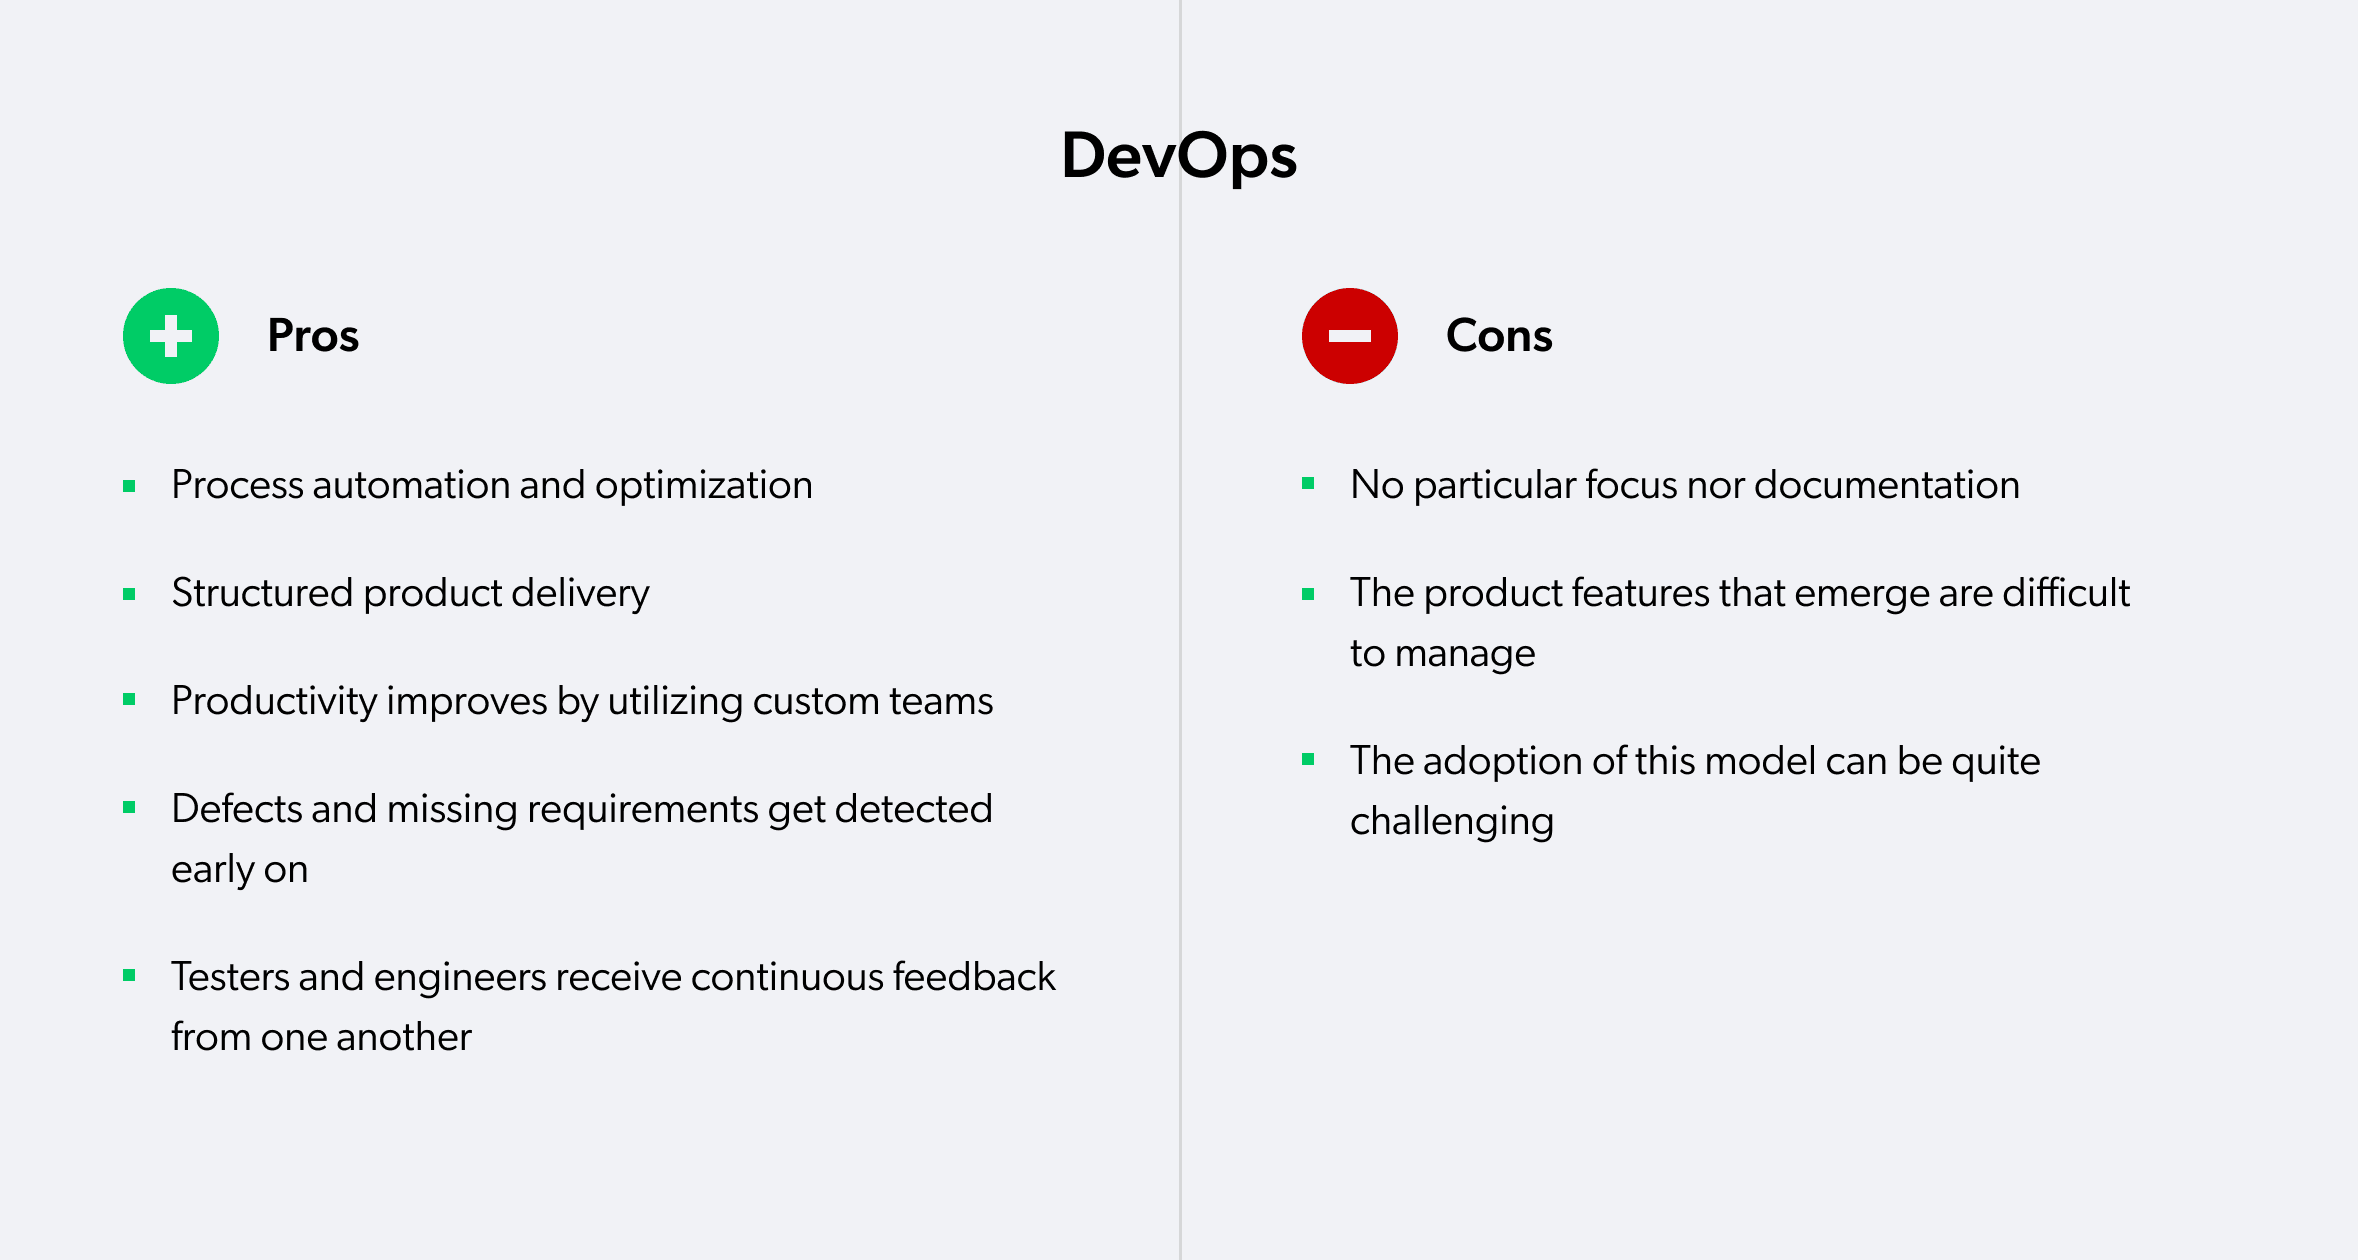 DevOps pros and cons